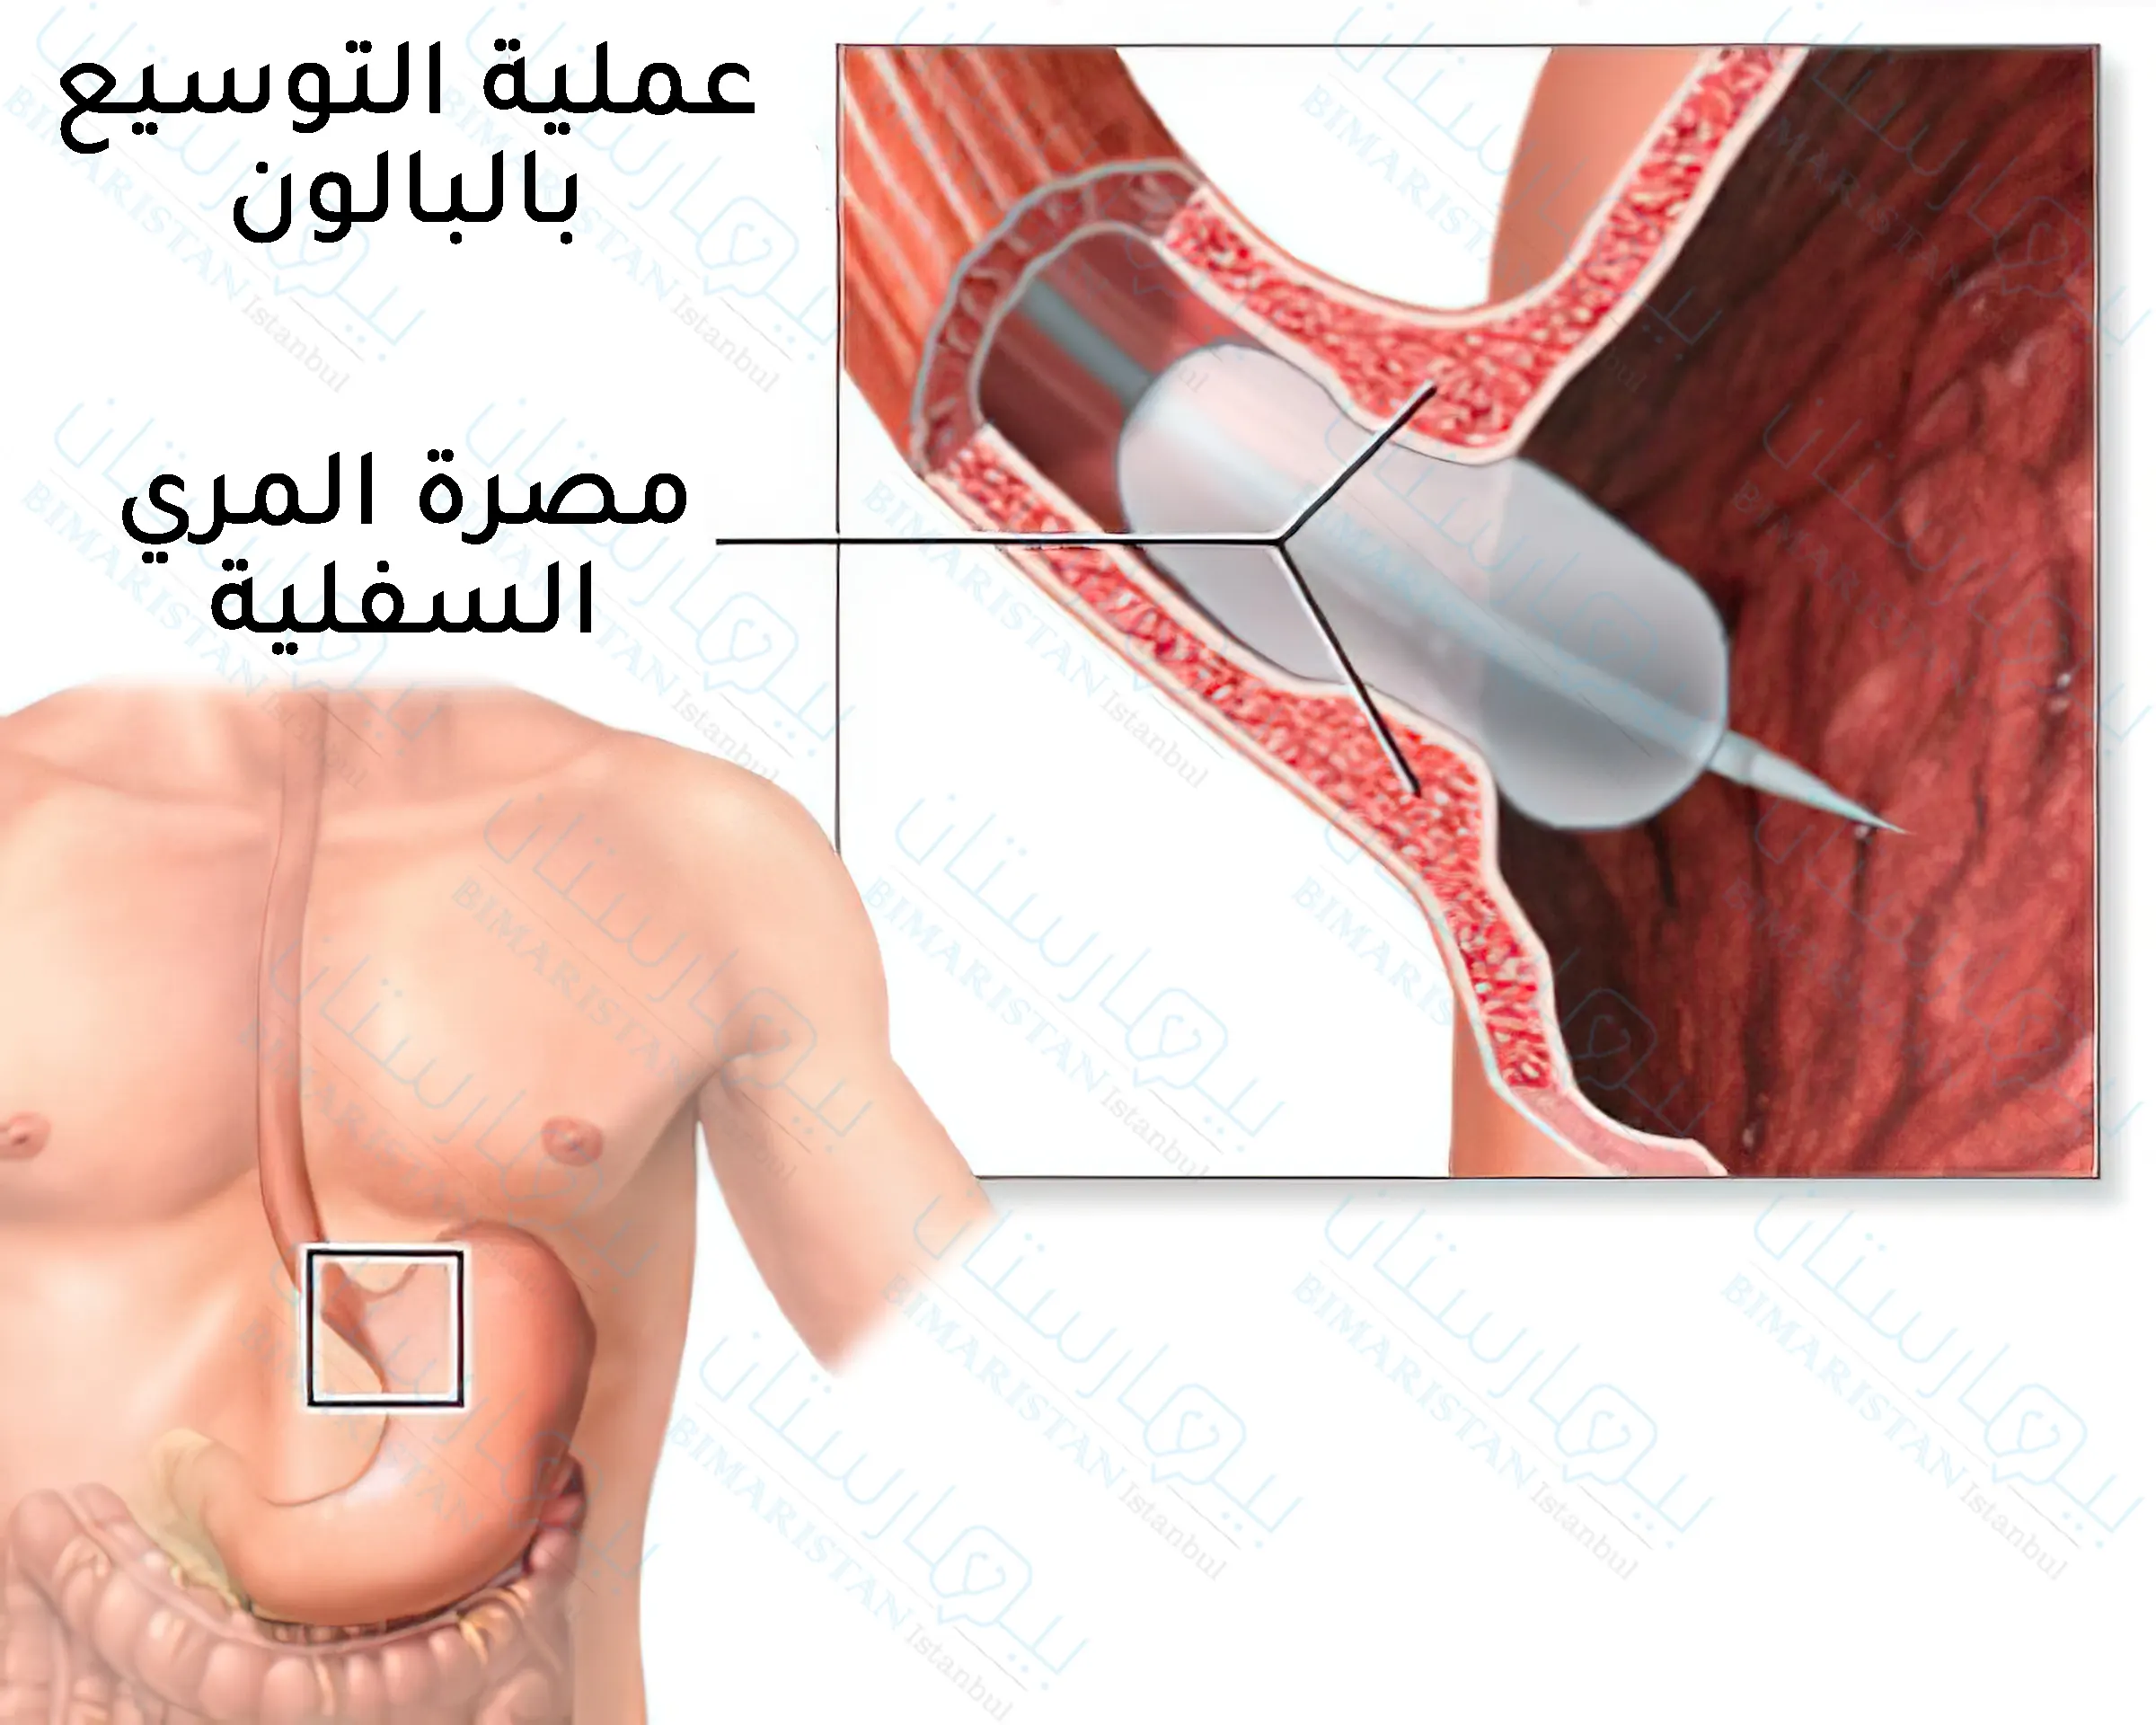 The esophageal sphincter dilatation surgery used to treat achalasia in Turkey